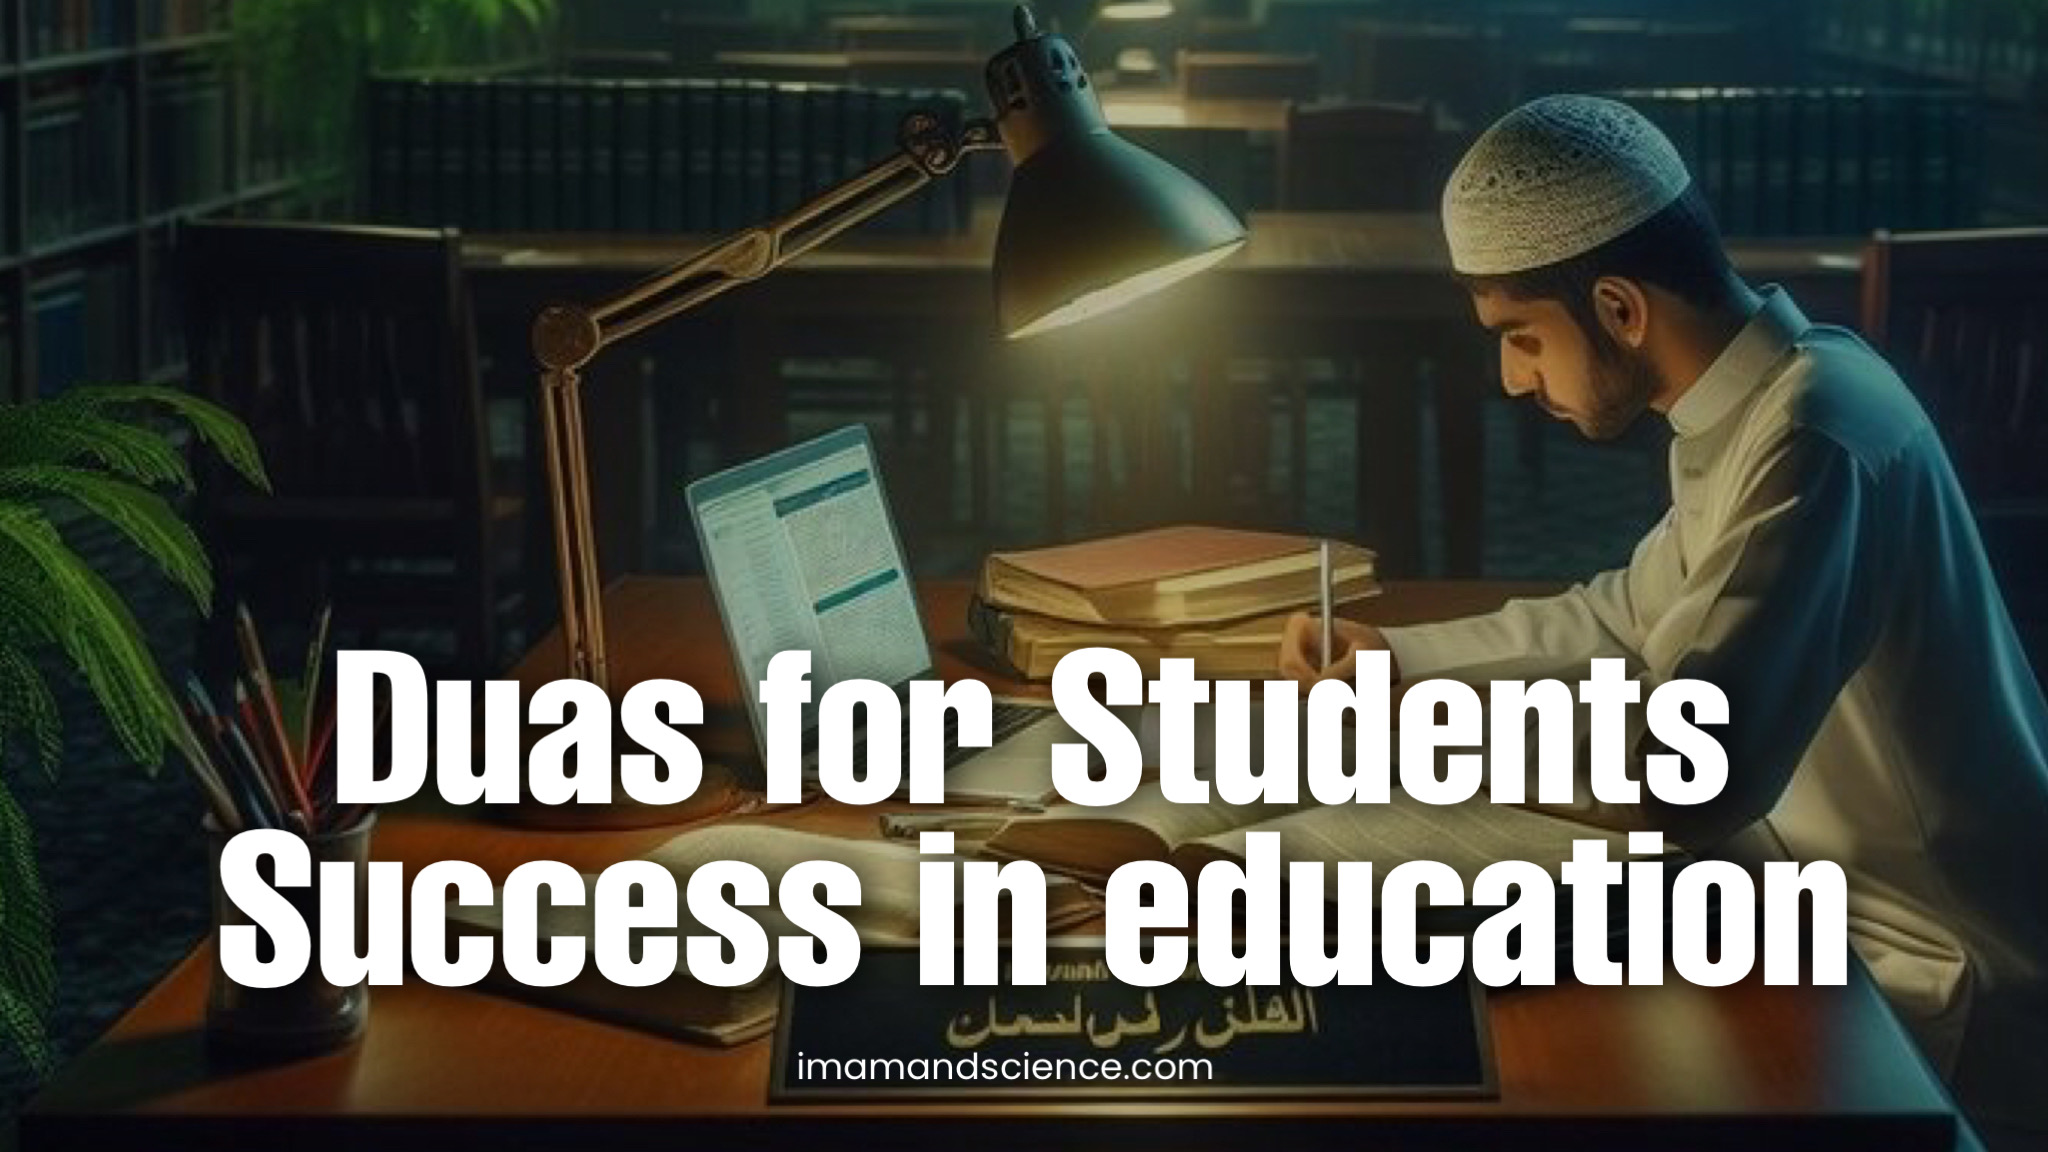 Duas for Students | Success in education